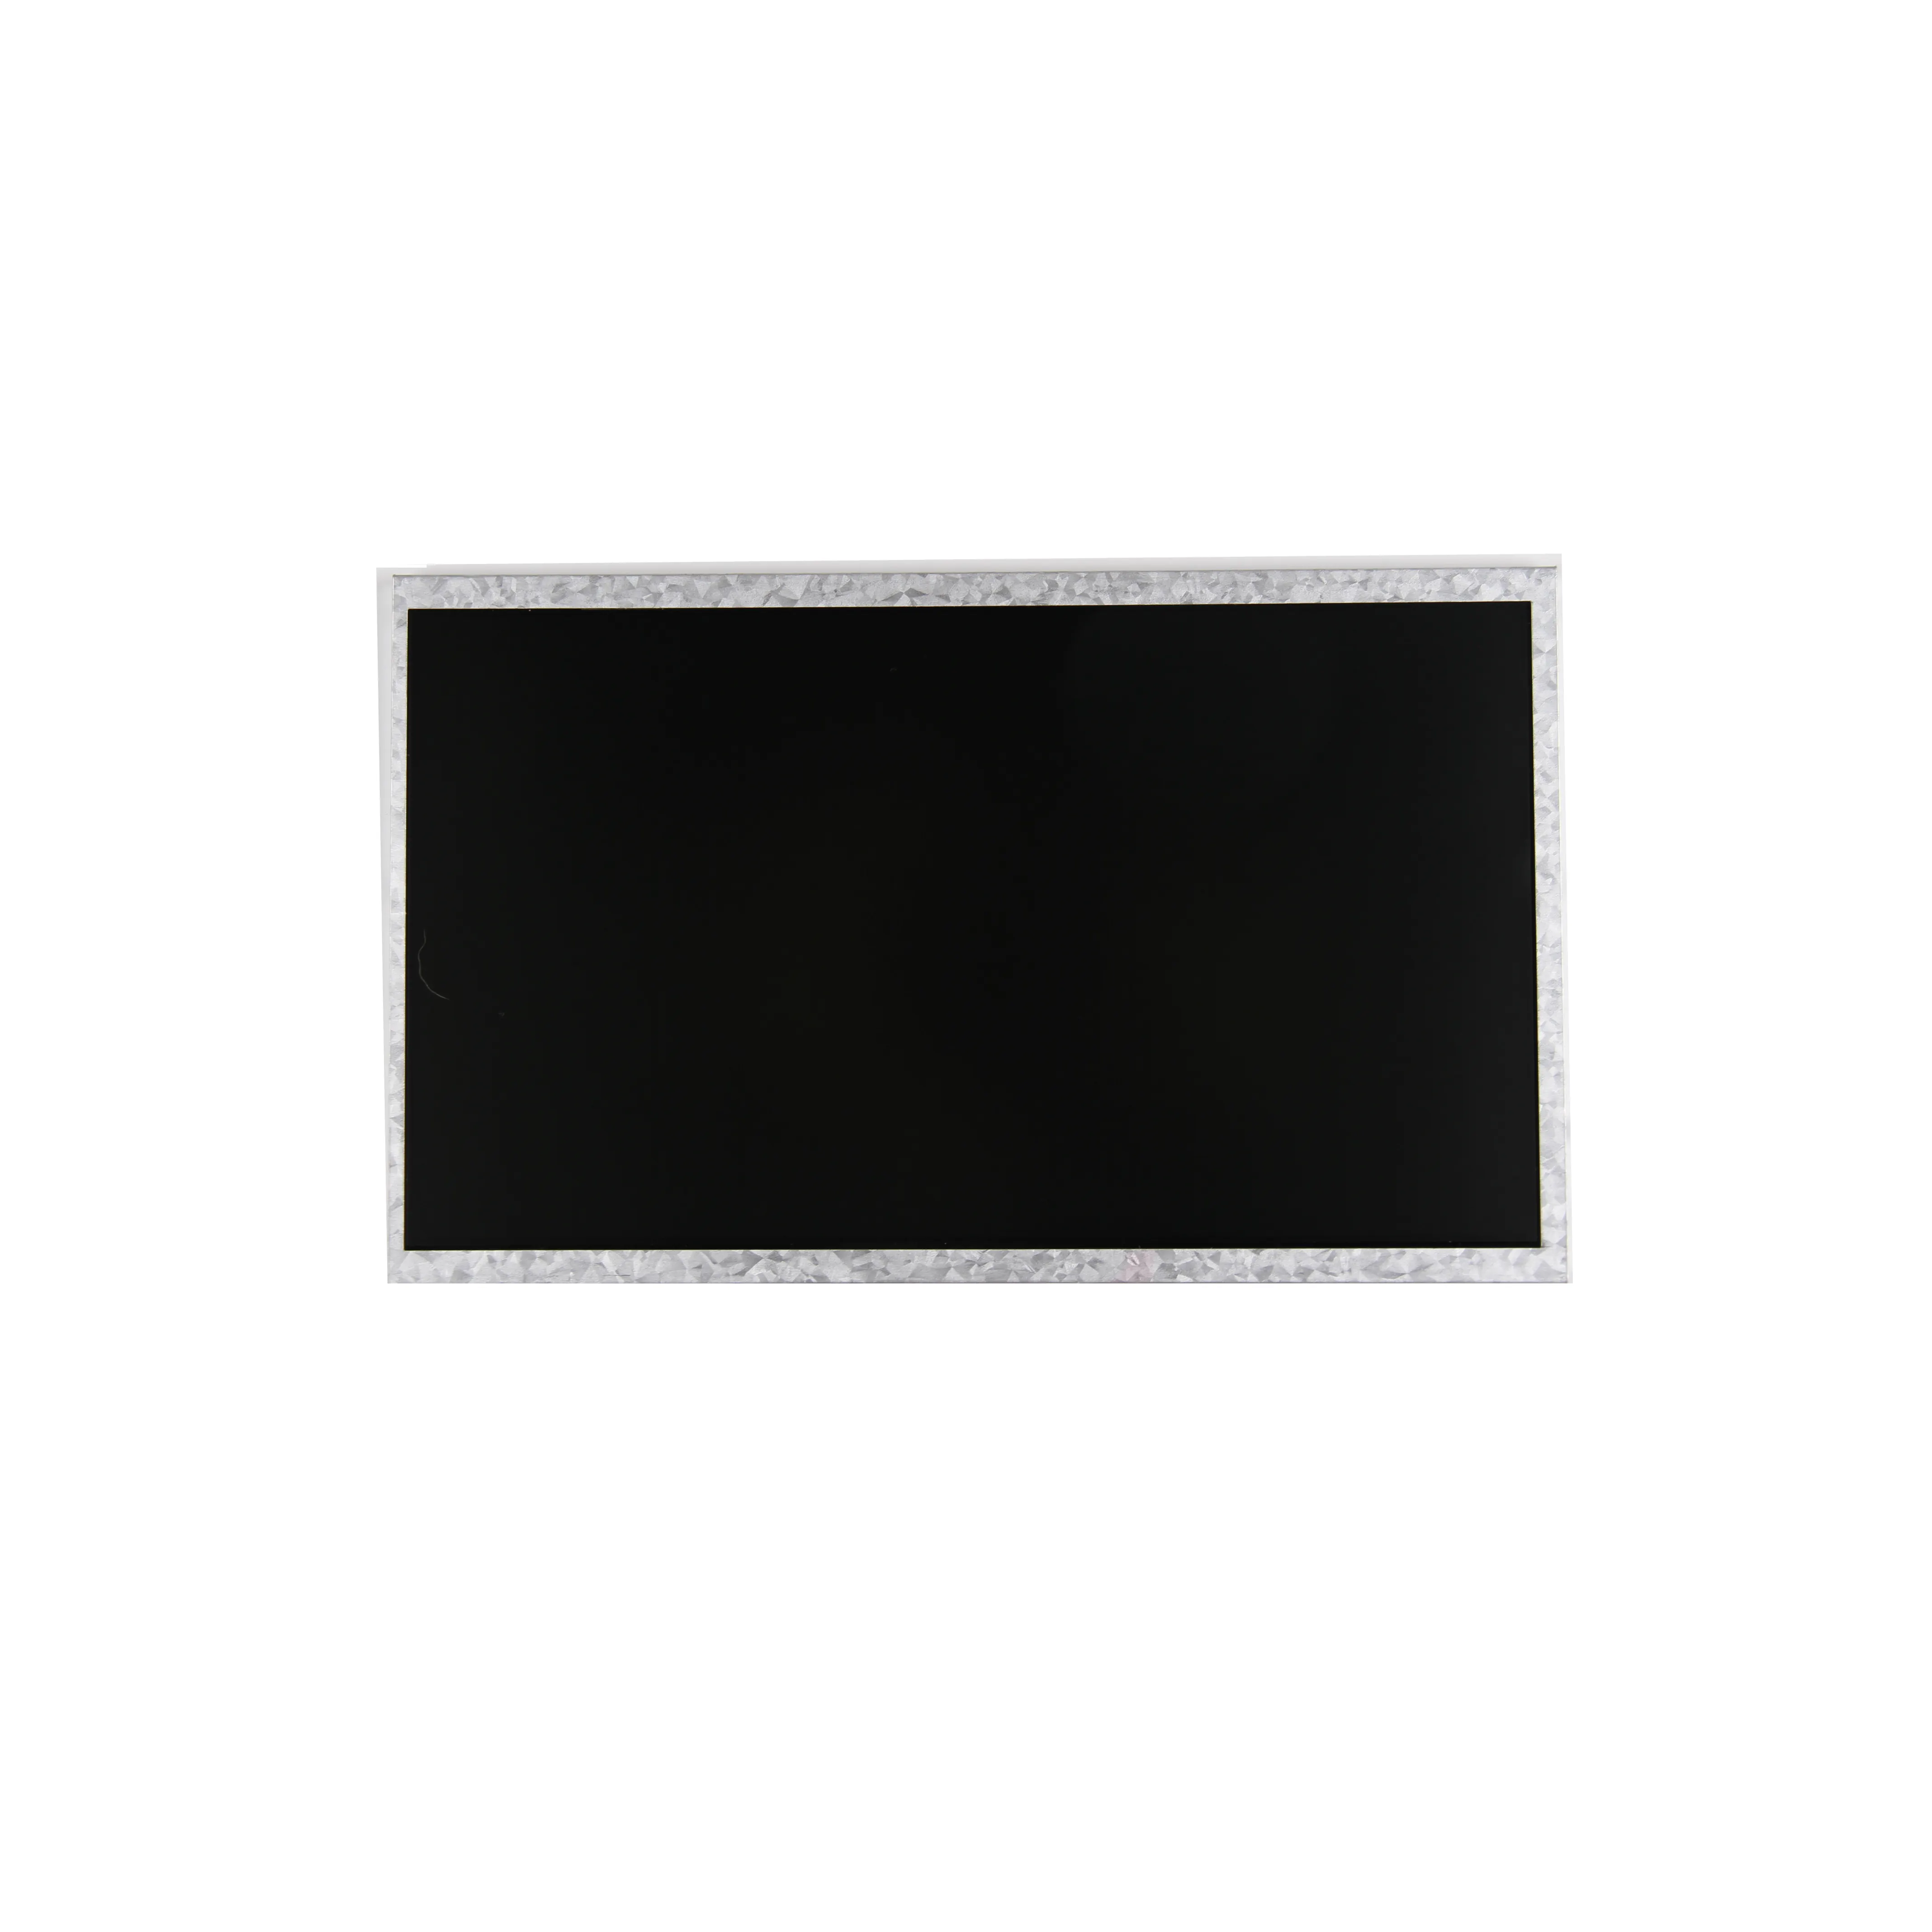 Sun readable 9inch 1280x720 400cd/m2 60pin lvds IPS viewing angle TFT LCD panel for outdoor monitor